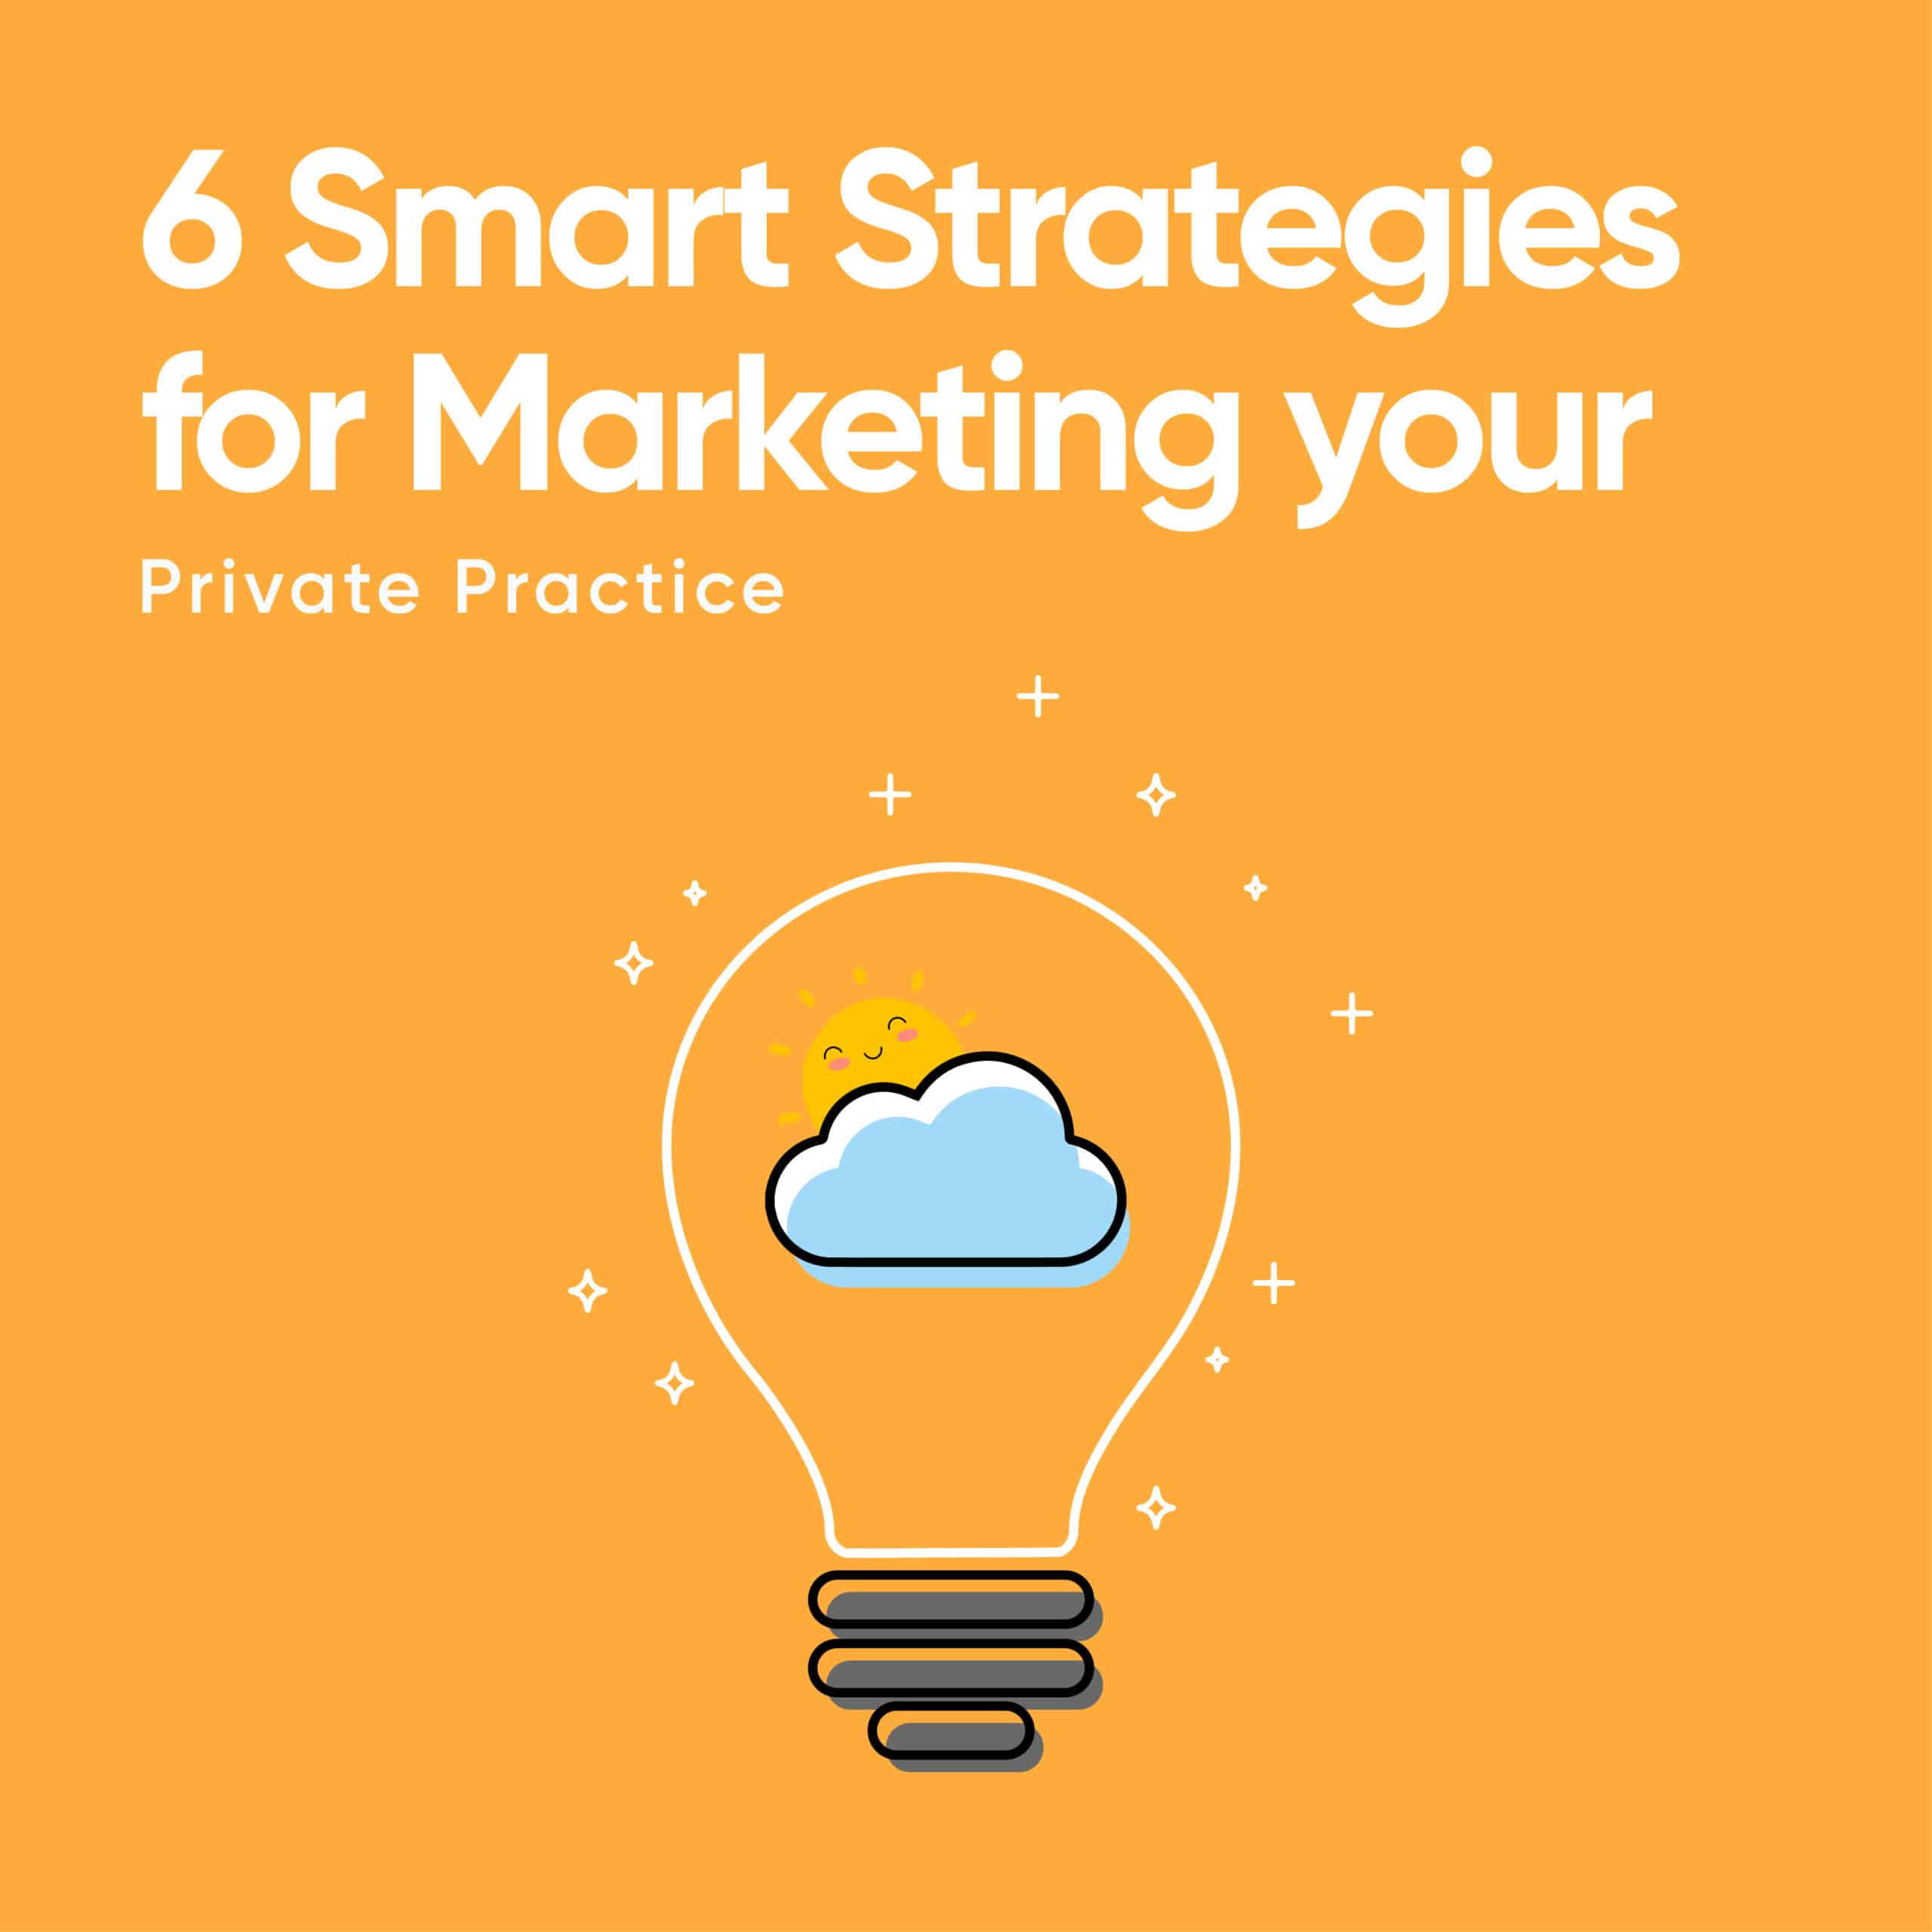 6 Smart Strategies for Marketing your Private Practice